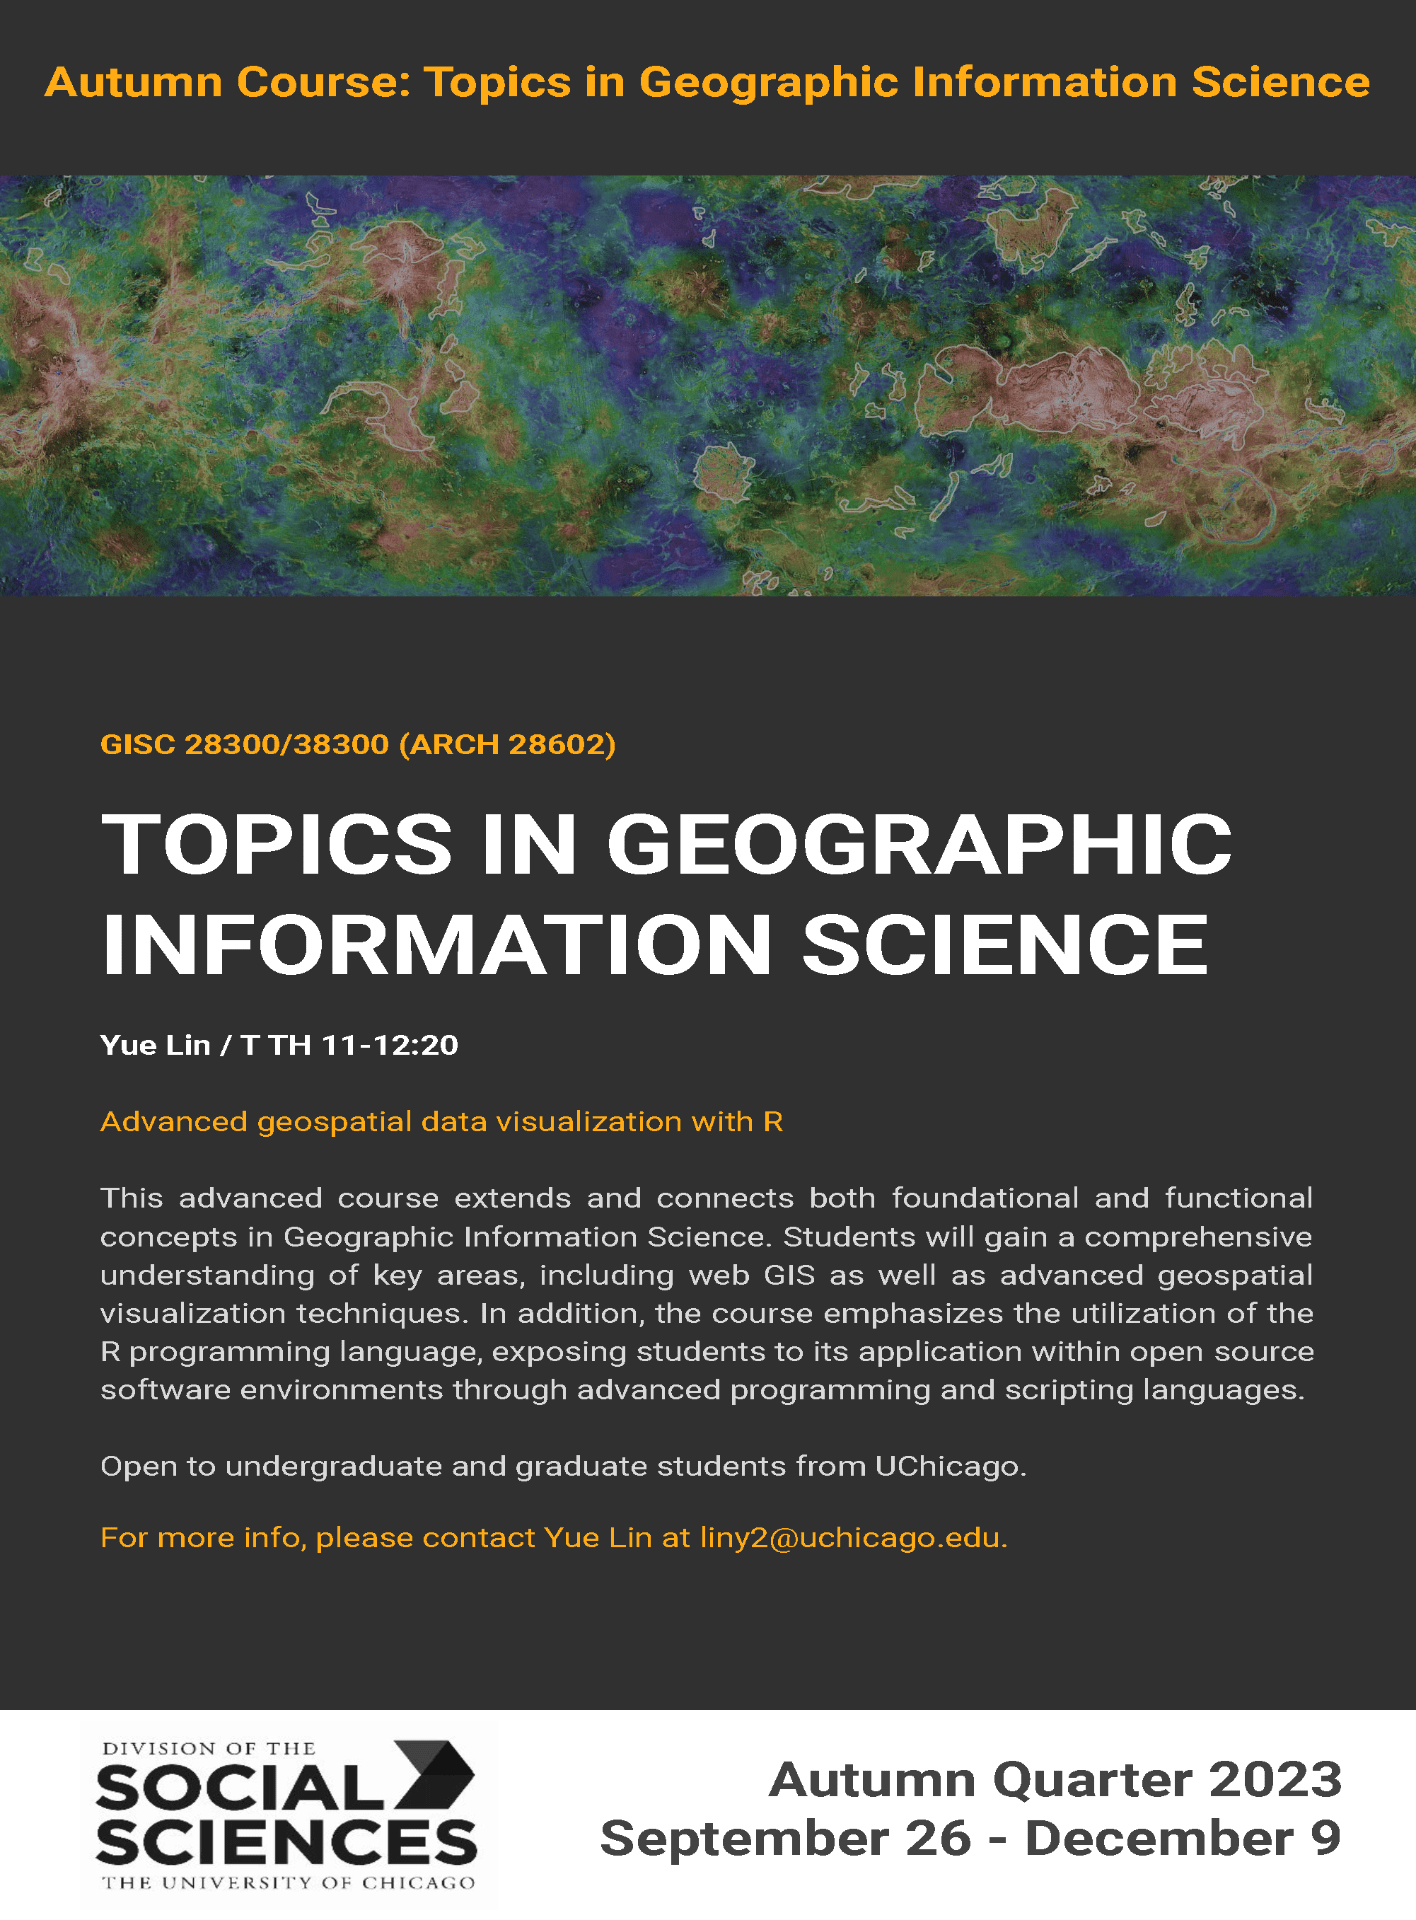 Course poster features an image of a map and text with class title and course description